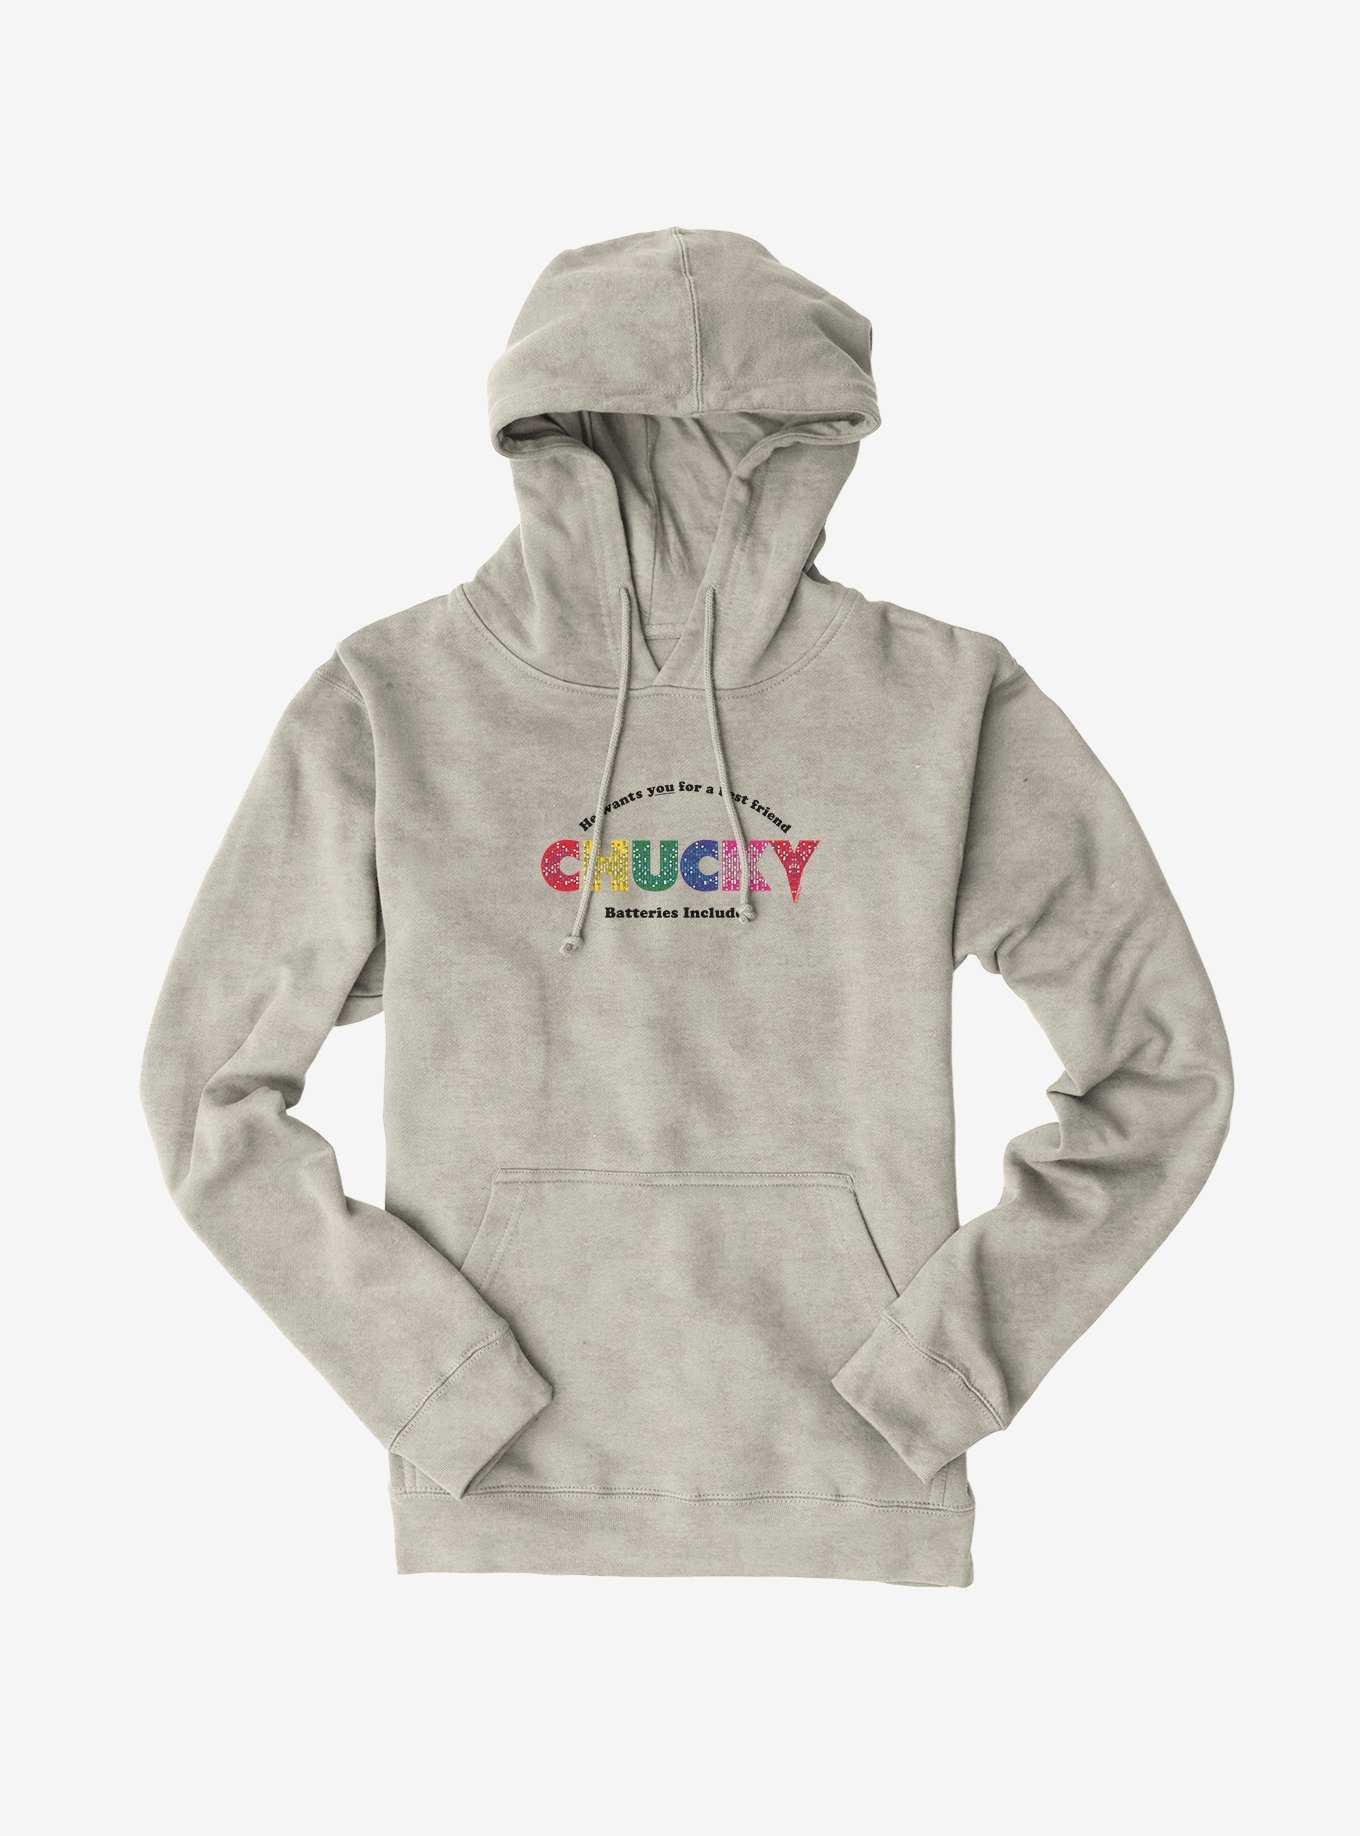 Chucky Batteries Included Hoodie, , hi-res